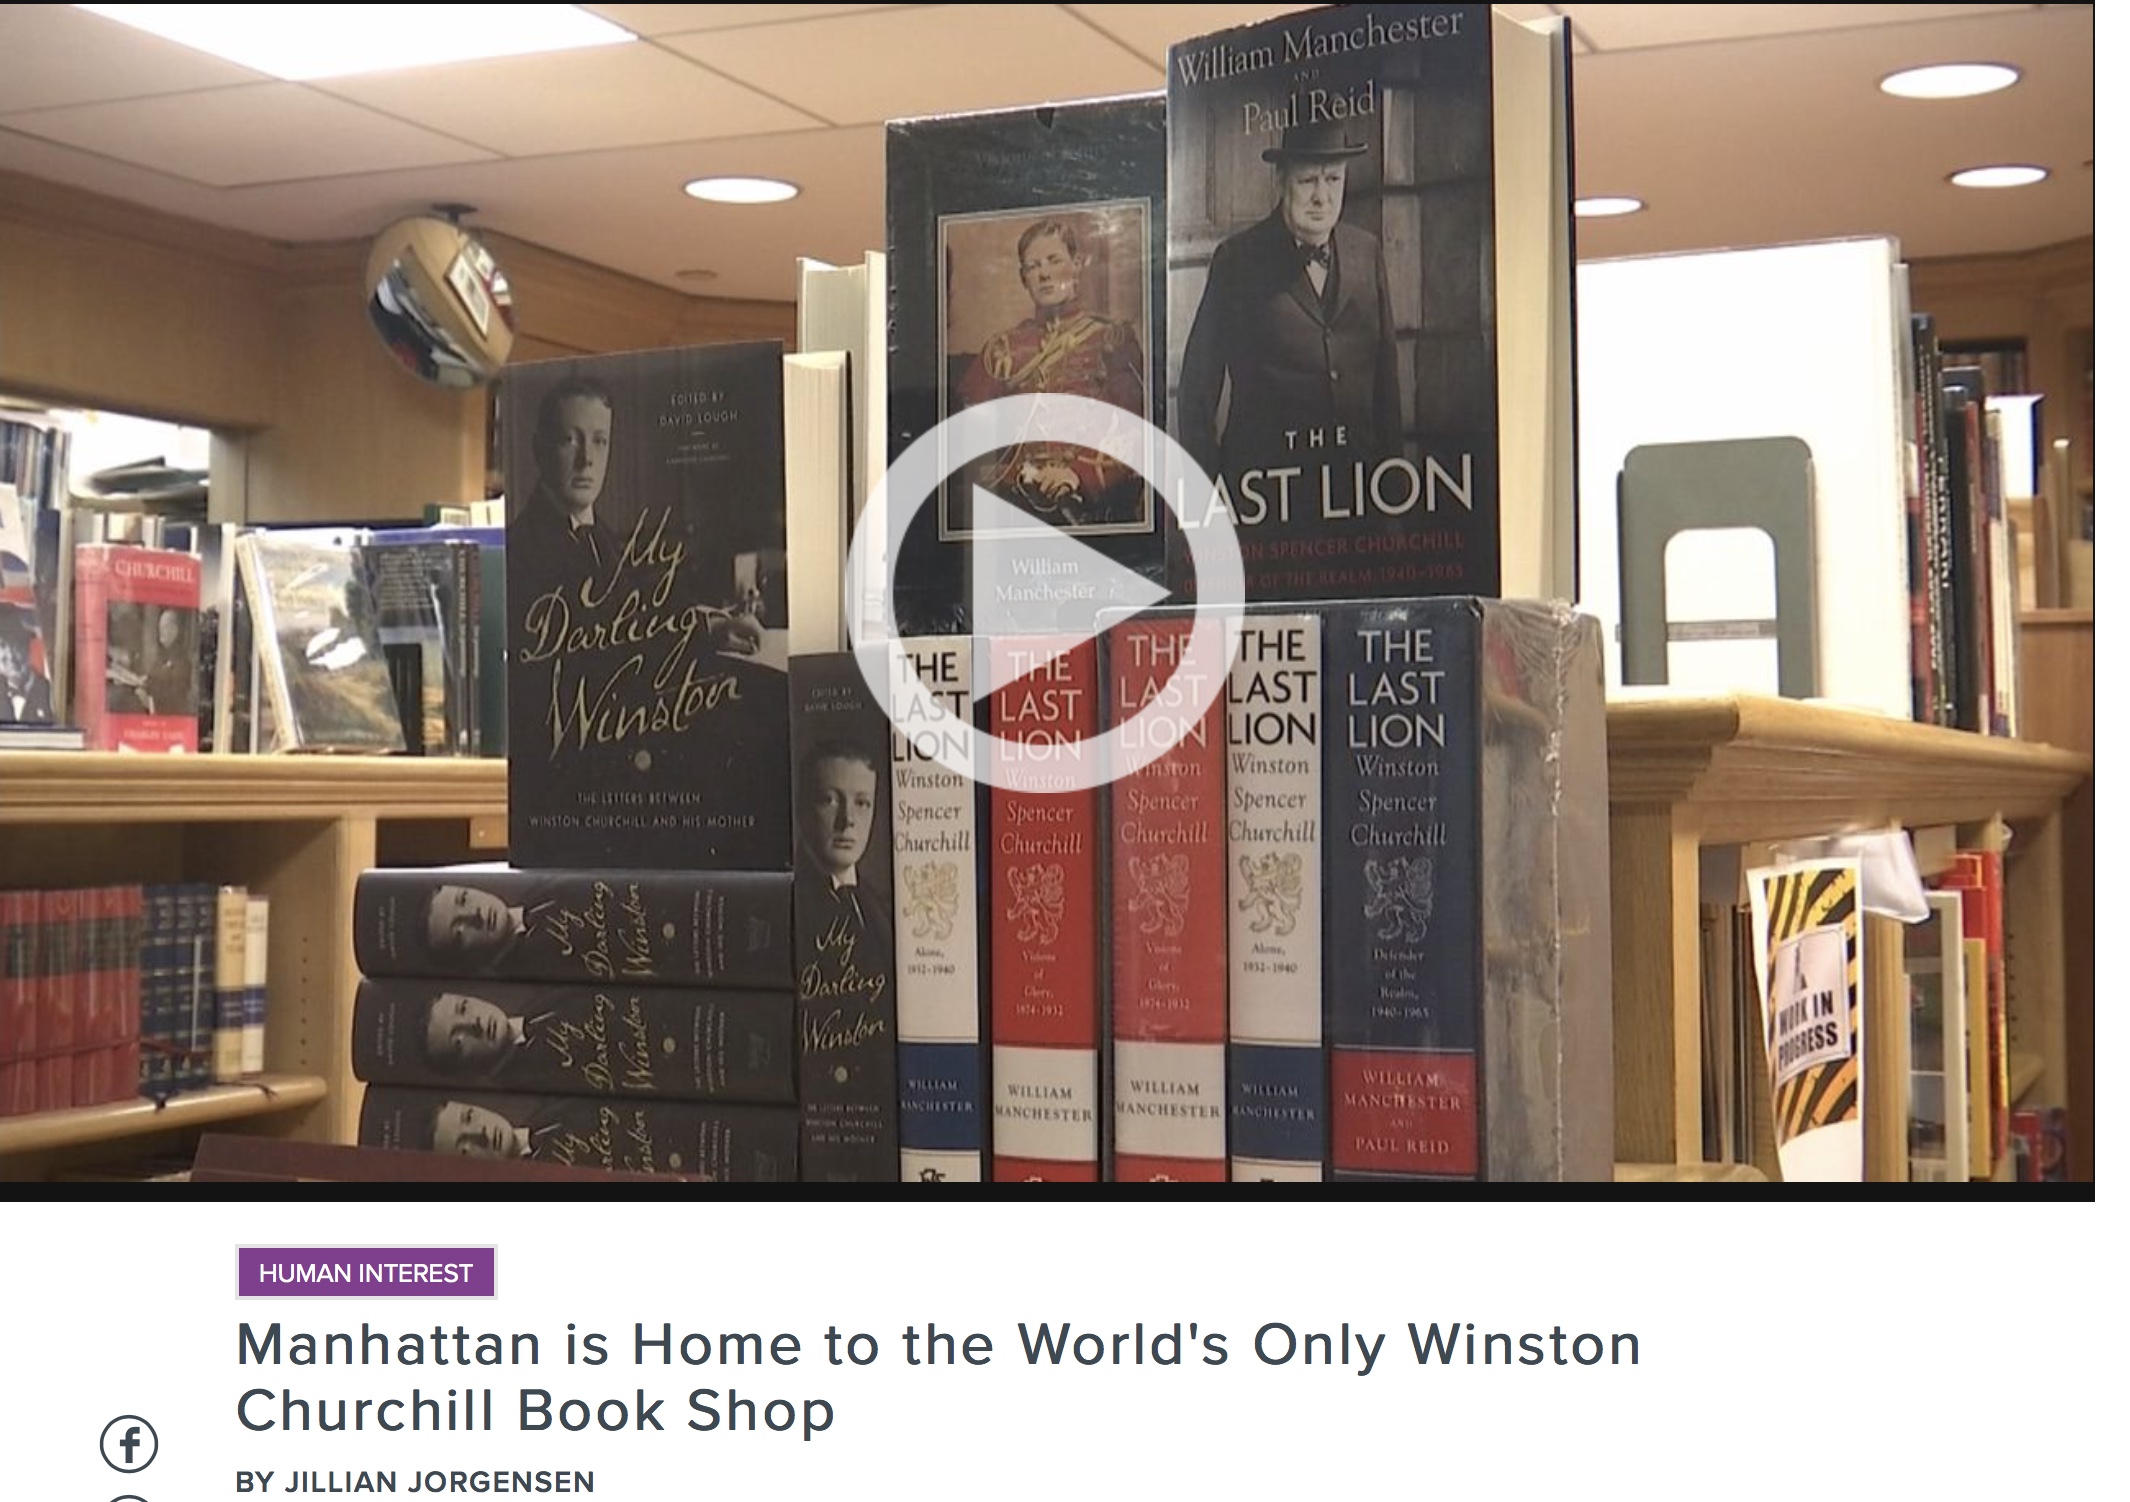 NY1 VISITS CHARTWELL BOOKSELLERS